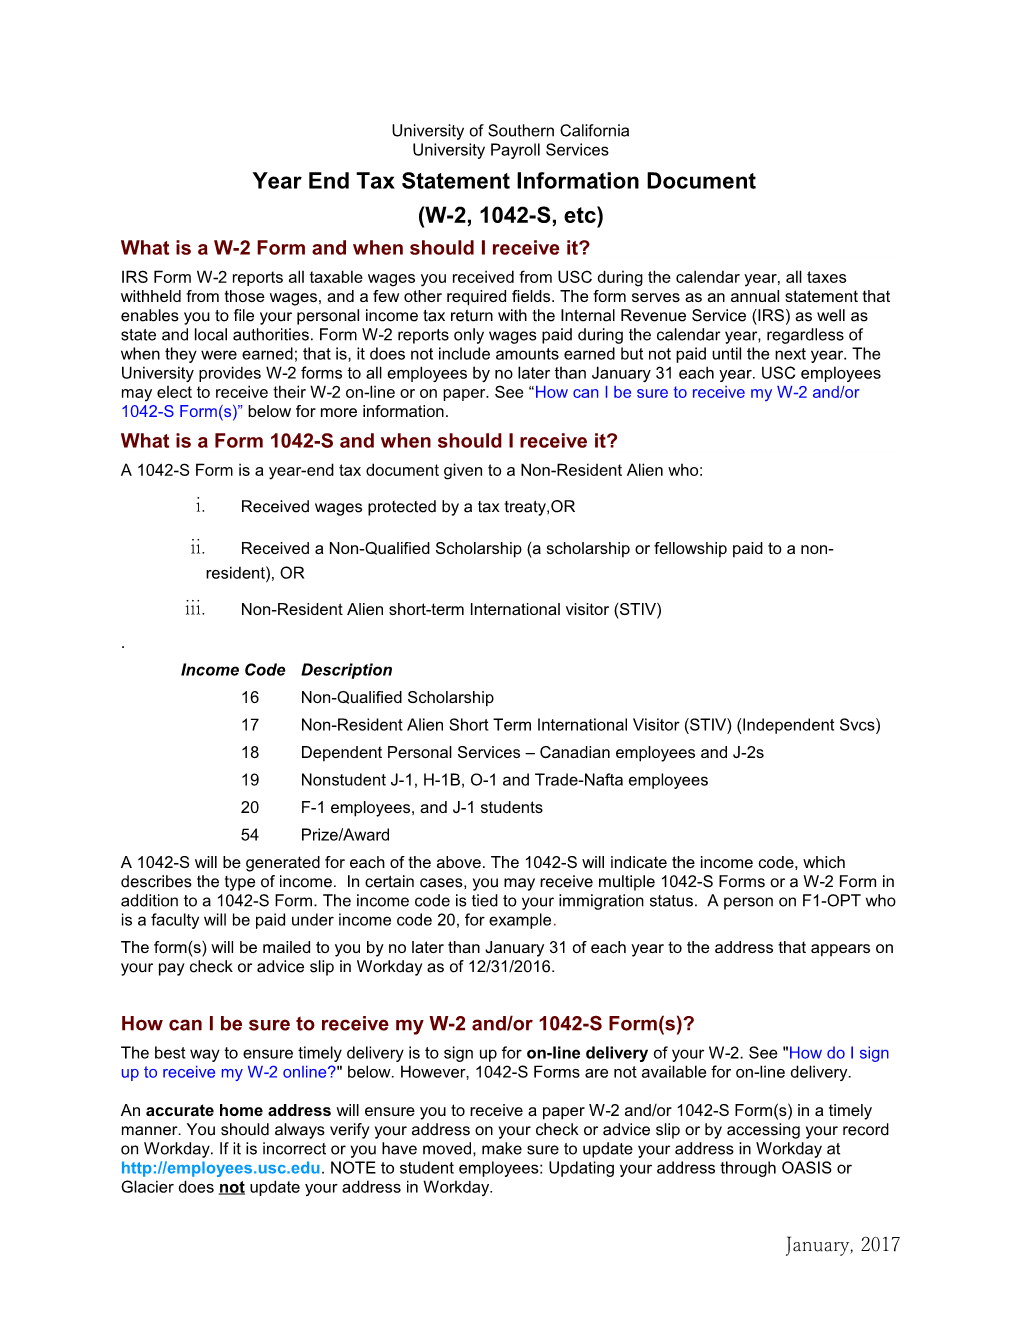 What Is a W-2 Form and When Should I Receive It?